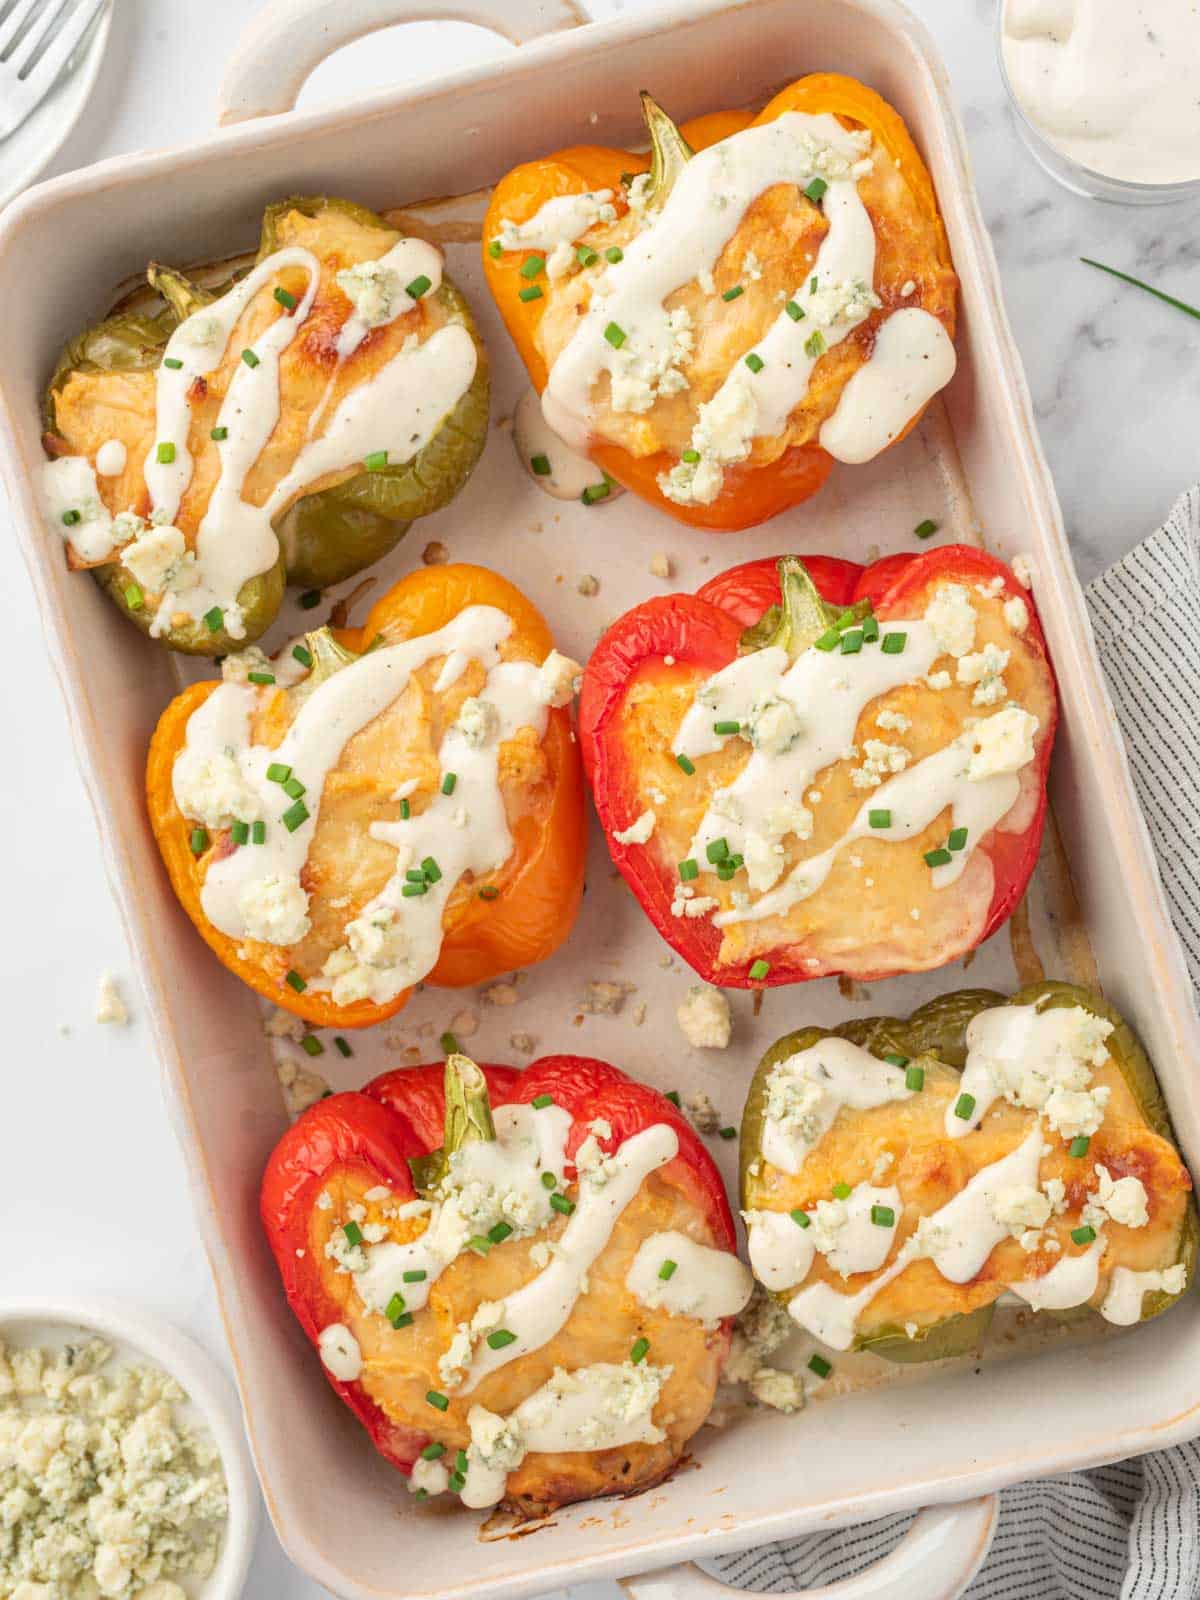 Healthy chicken stuffed peppers topped with ranch and crumbled blue cheese in a baking dish.